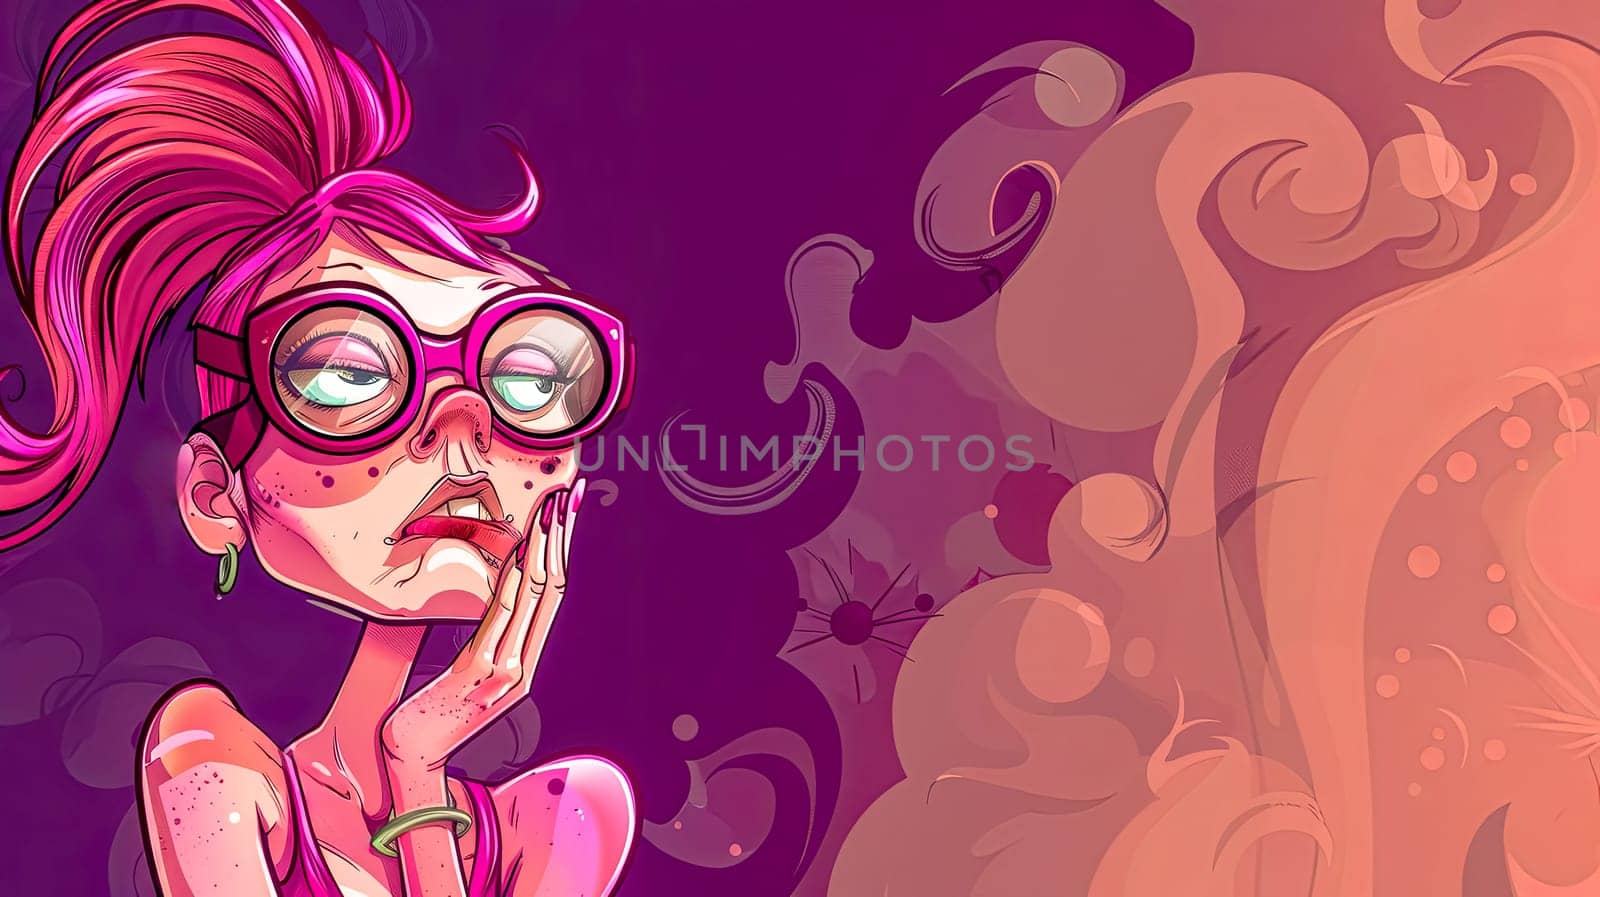 Bored cartoon hipster girl with colorful background by Edophoto